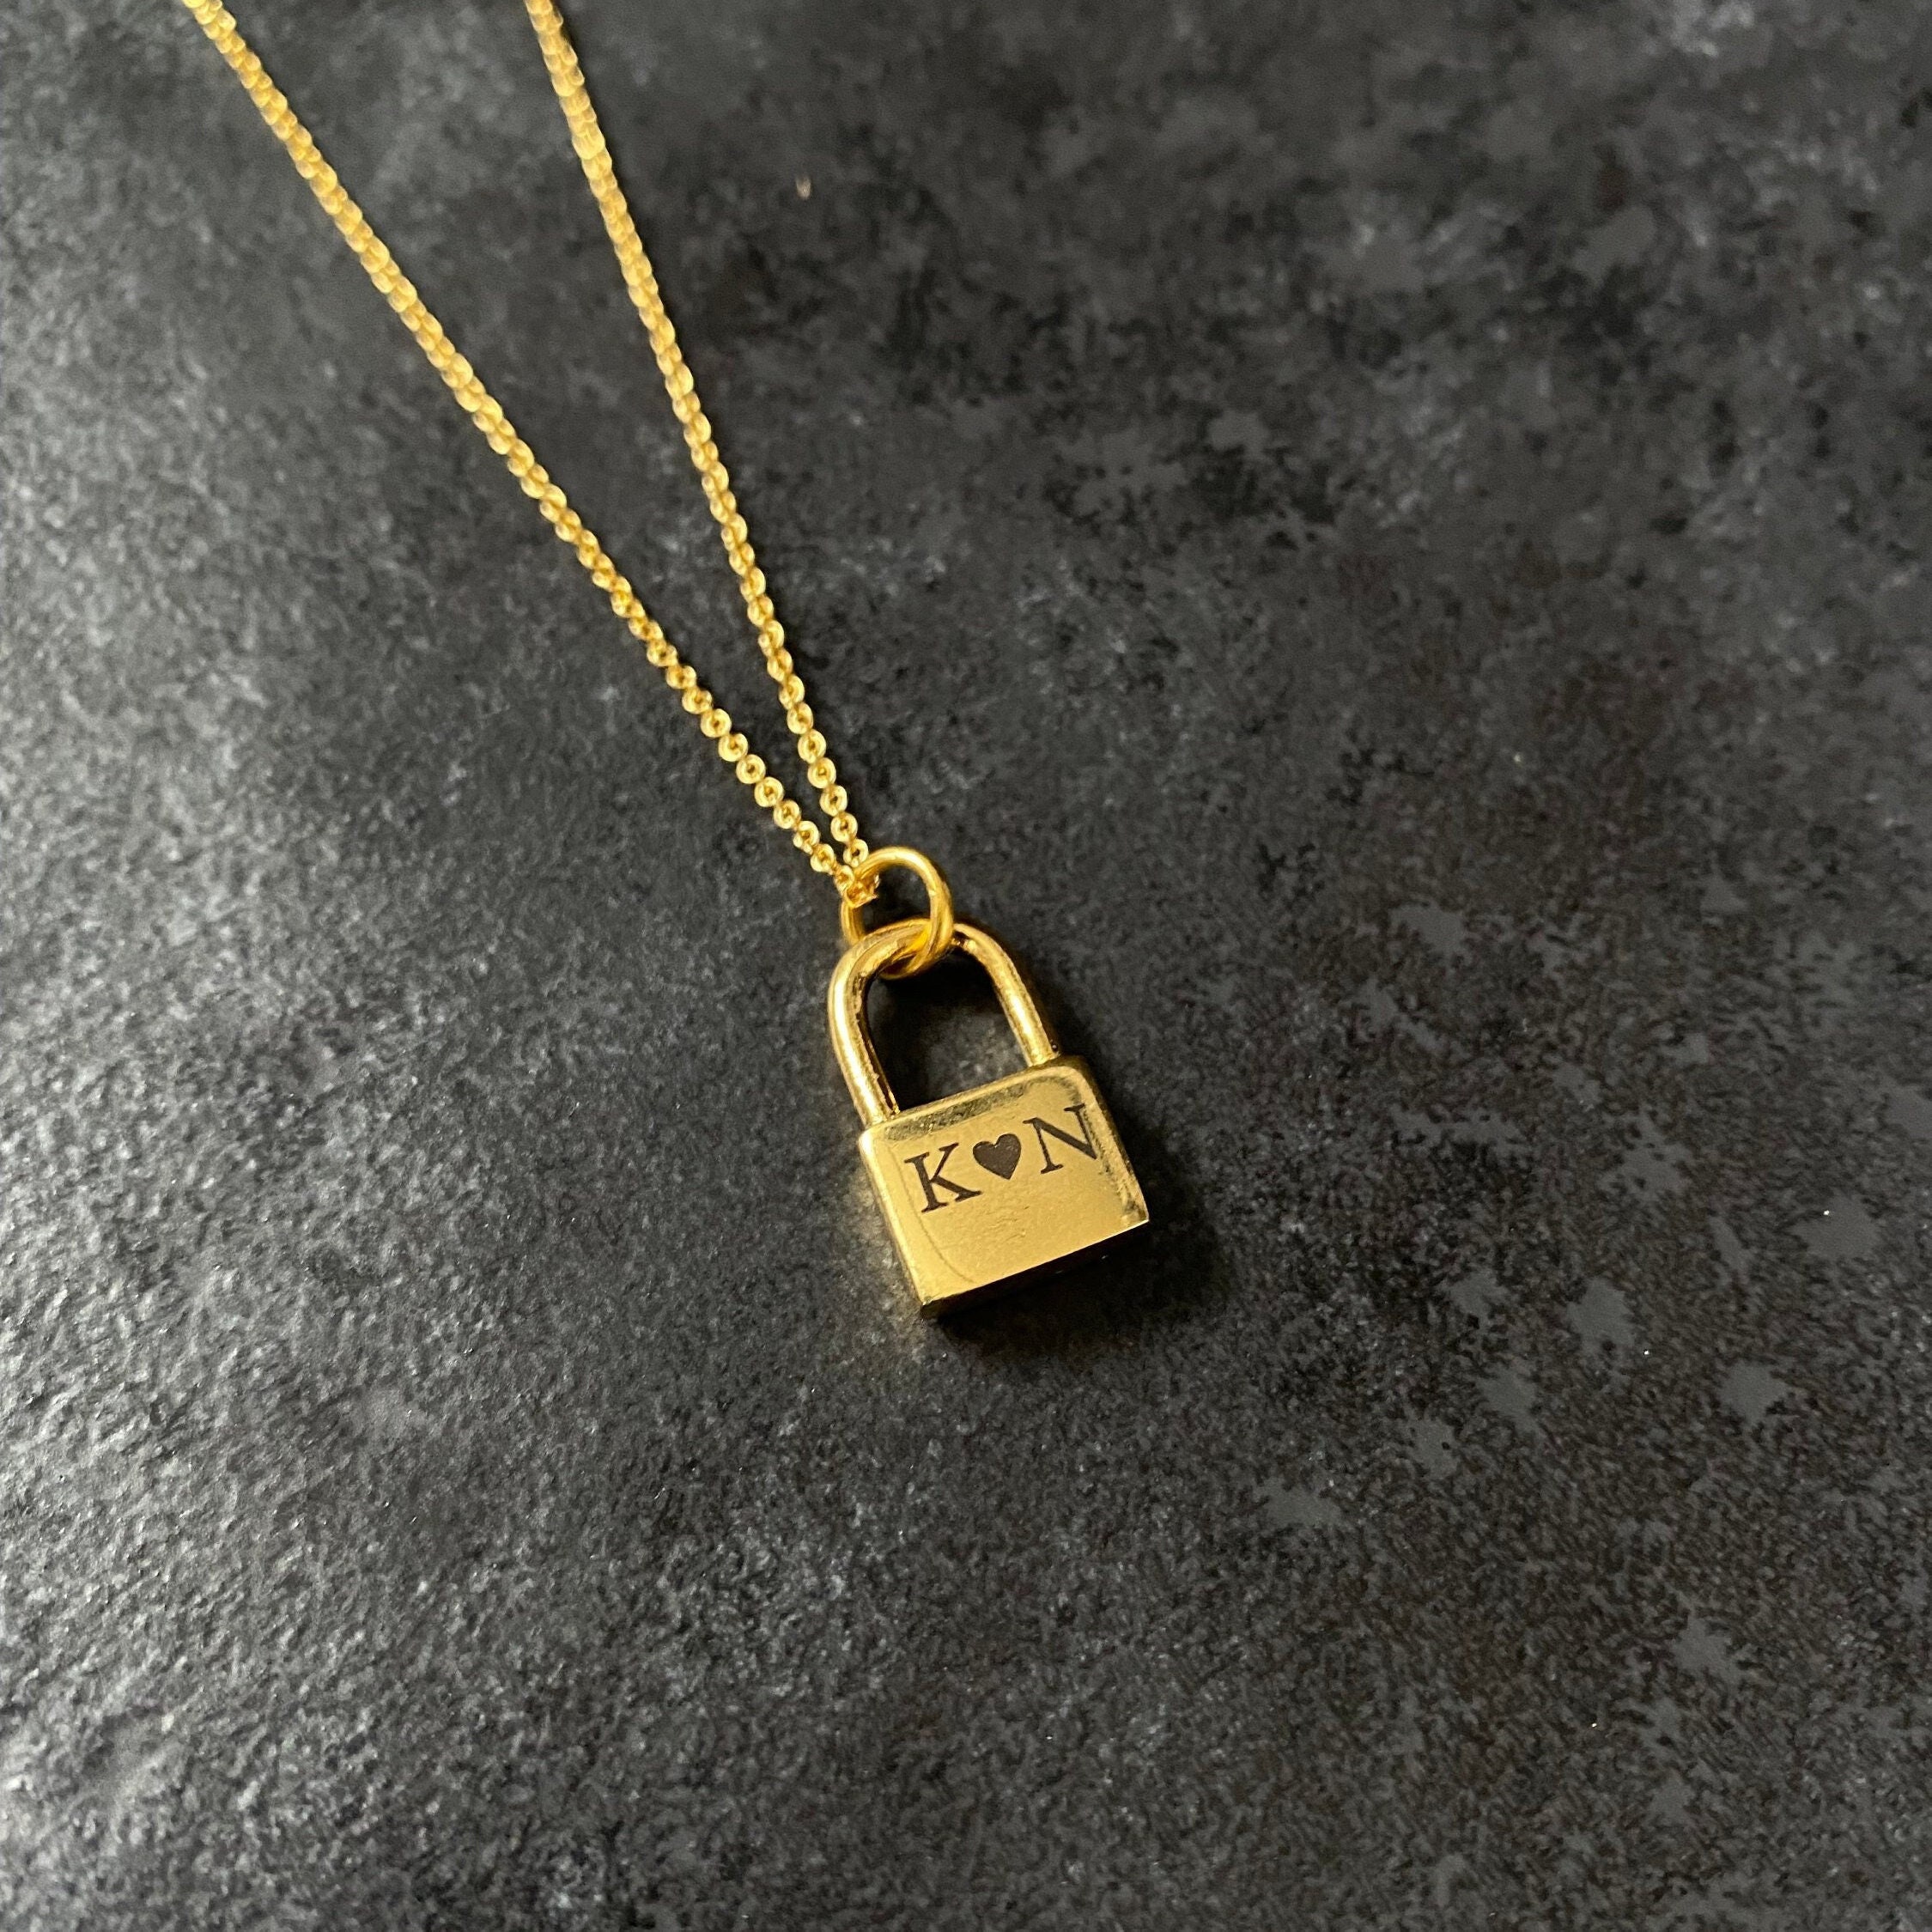 Personalized Initial R Lovers Padlock Lock Pendant Necklace